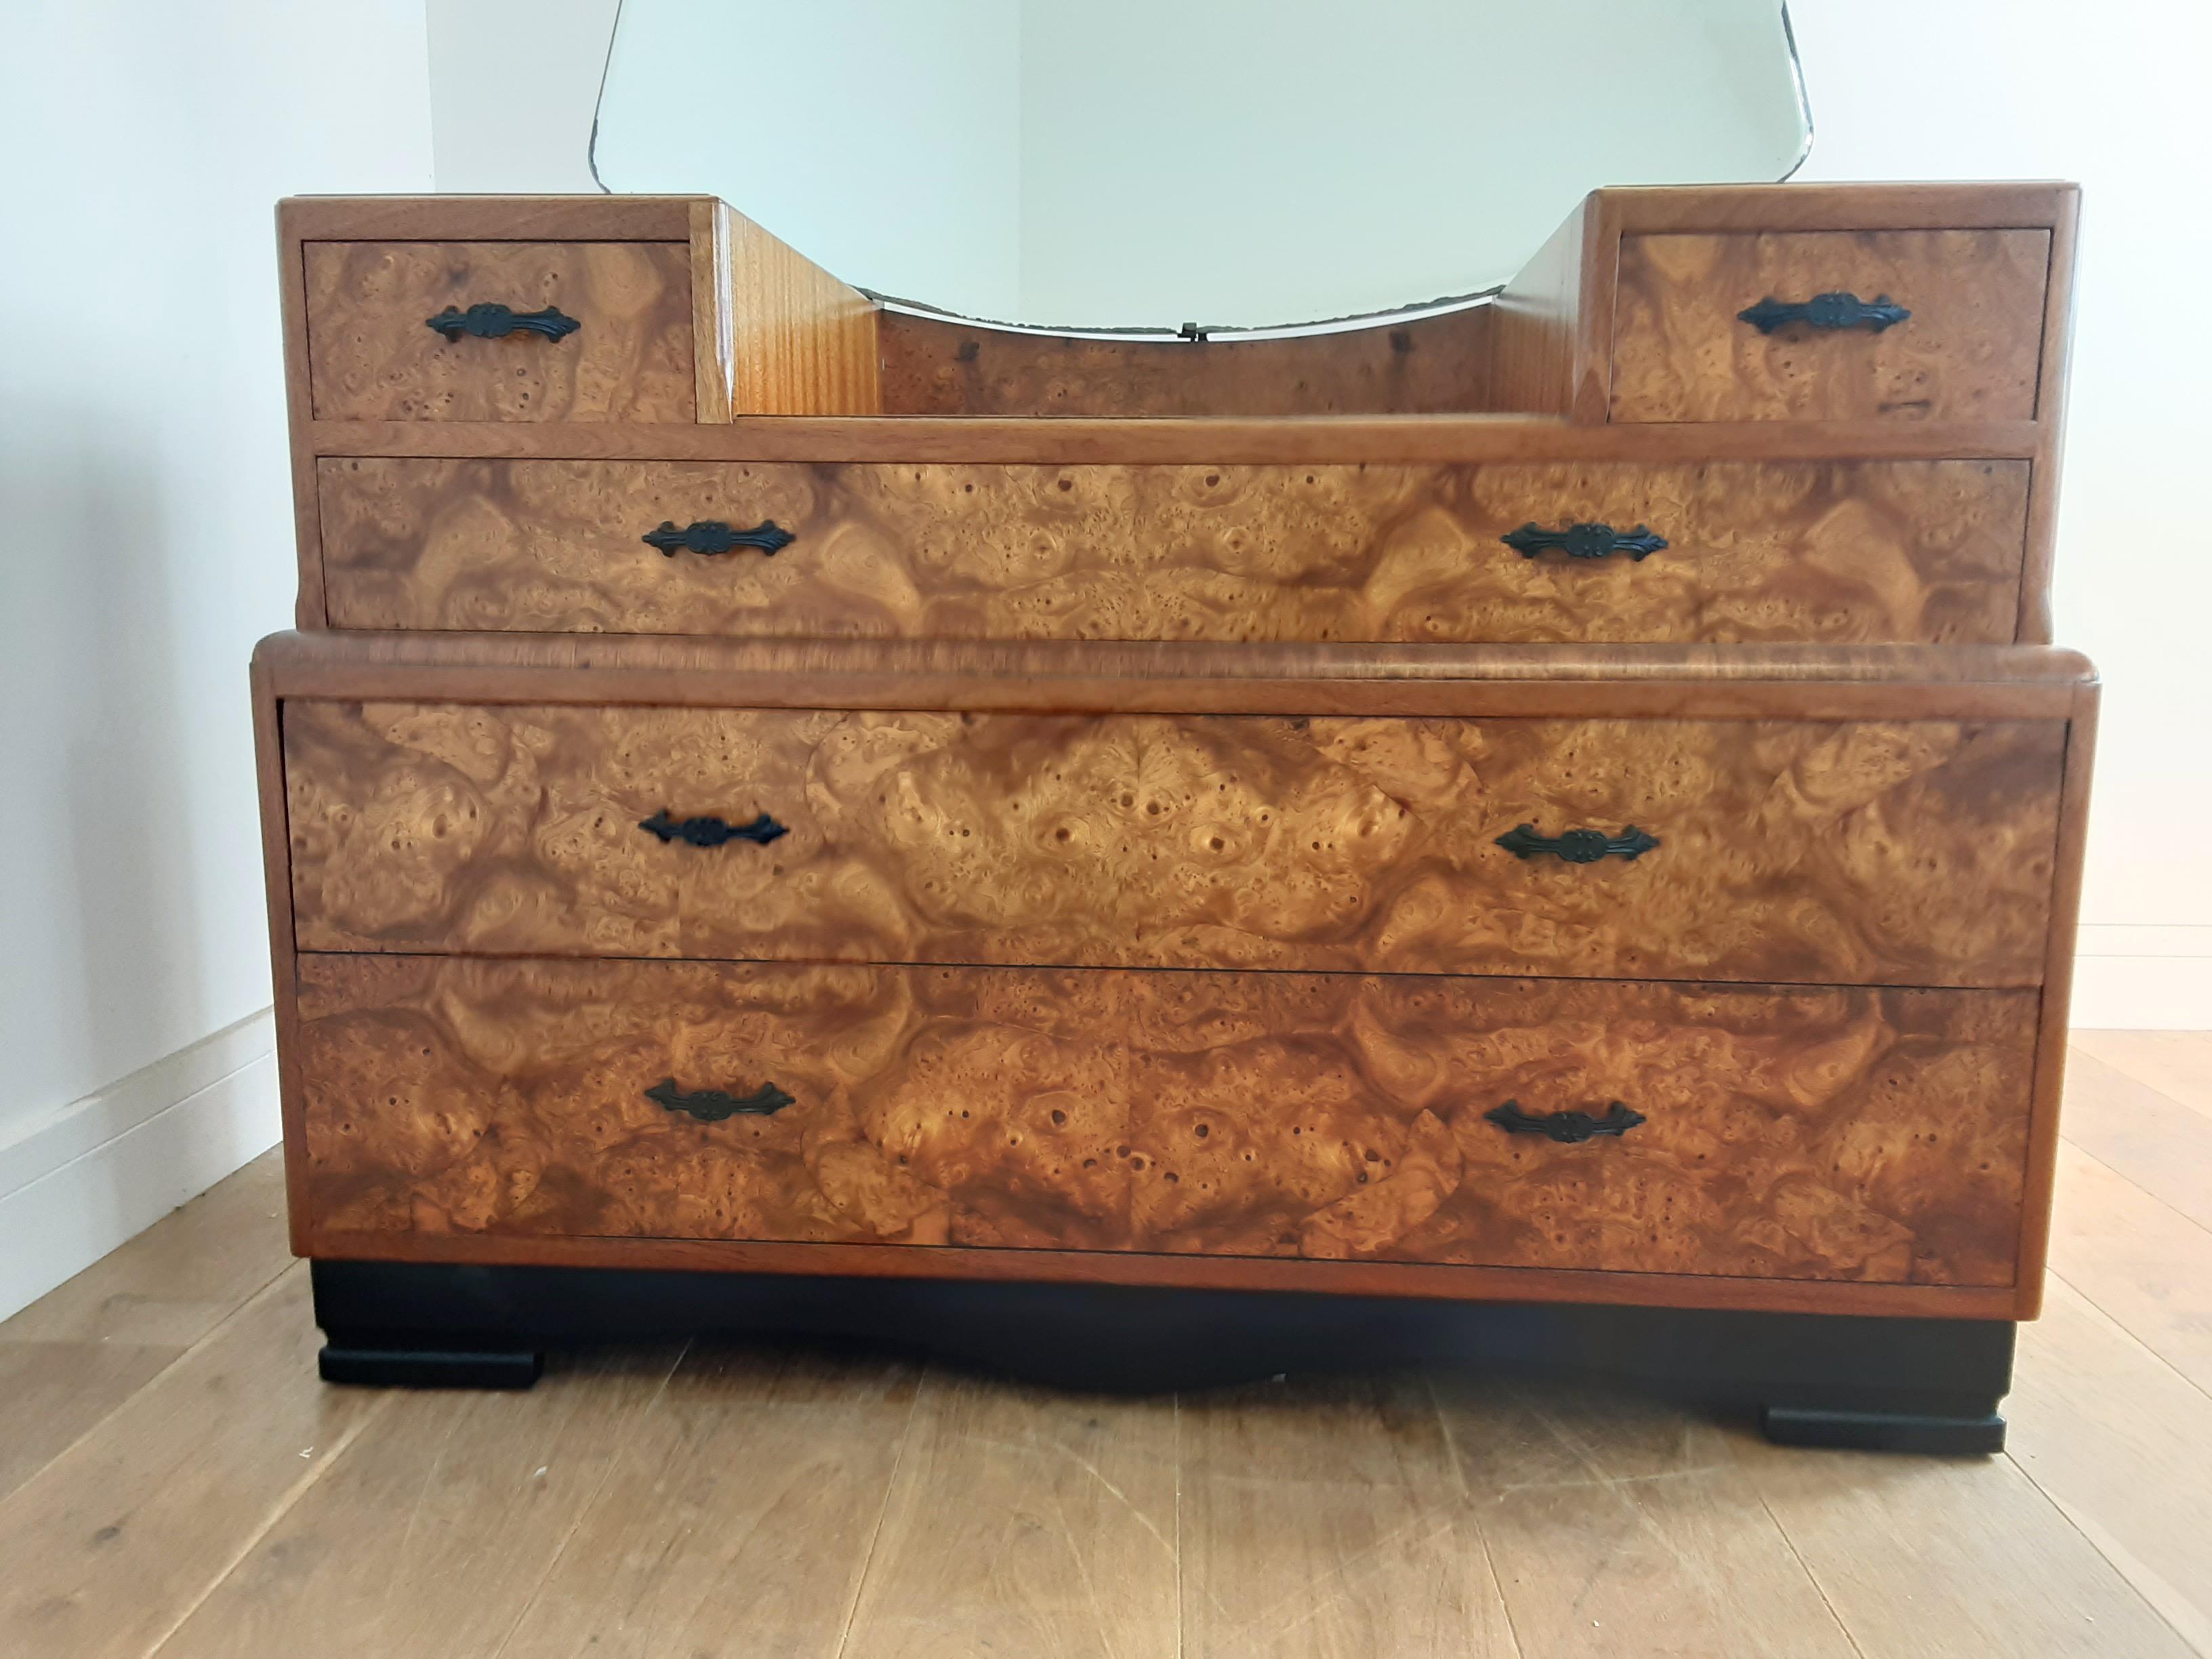 Art Deco dressing table
beautiful Art Deco dressing table in a stunning bird's-eye maple, three long drawers and two top drawers, shield shaped mirror.
ebony plinth.
Measures: 74 cm H at the sides 62 cm H in the centre 107 cm W 46 cm D 150 H to